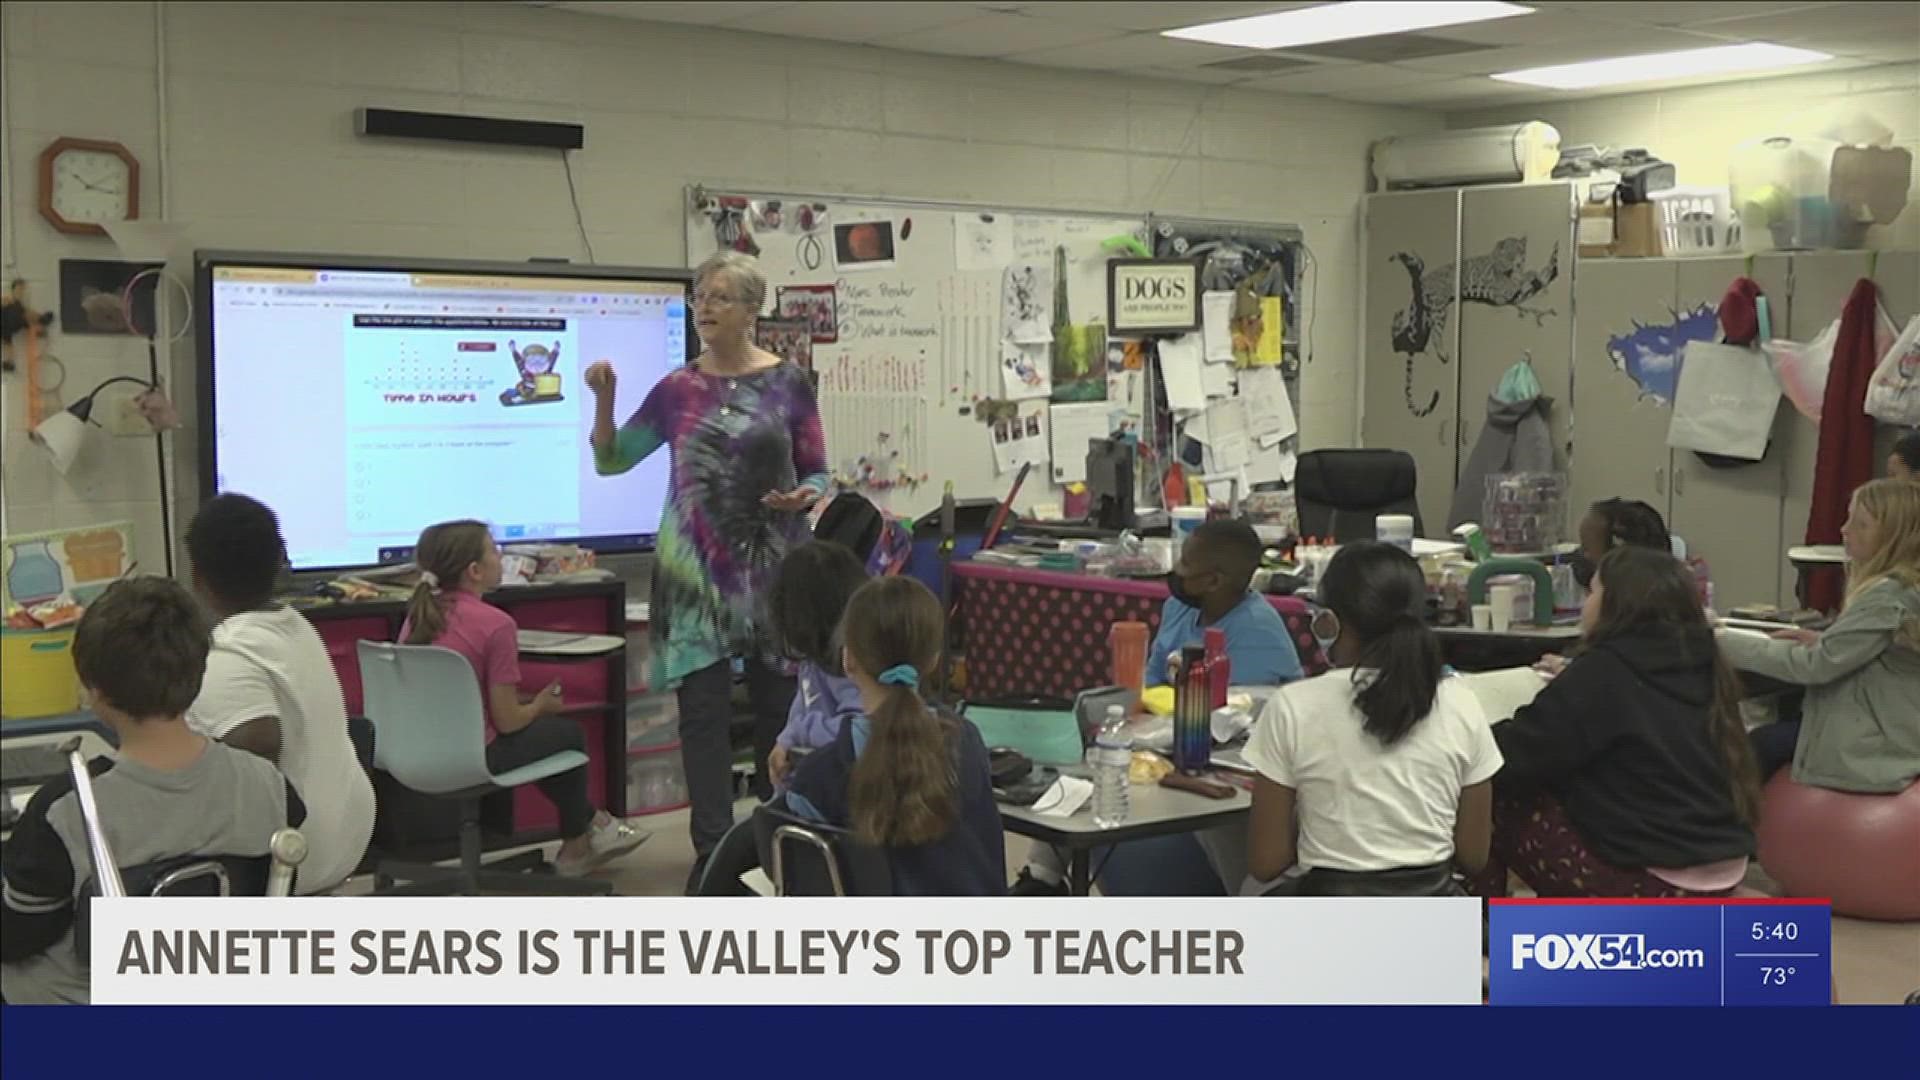 Mrs. Annette Sears is the Valley's Top Teacher. She's a 4th grade teacher at Madison Cross Roads Elementary.